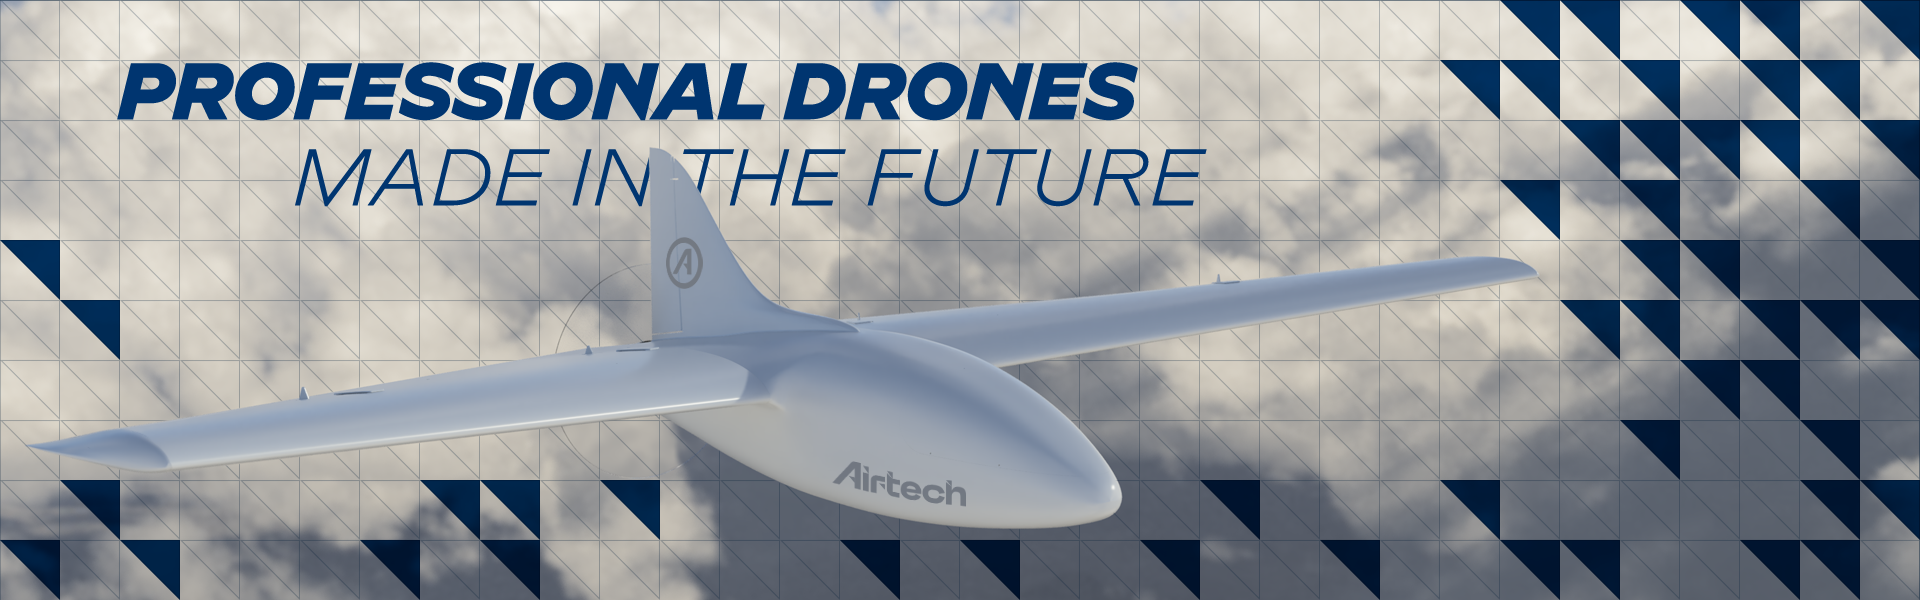 Professional drones made in the future